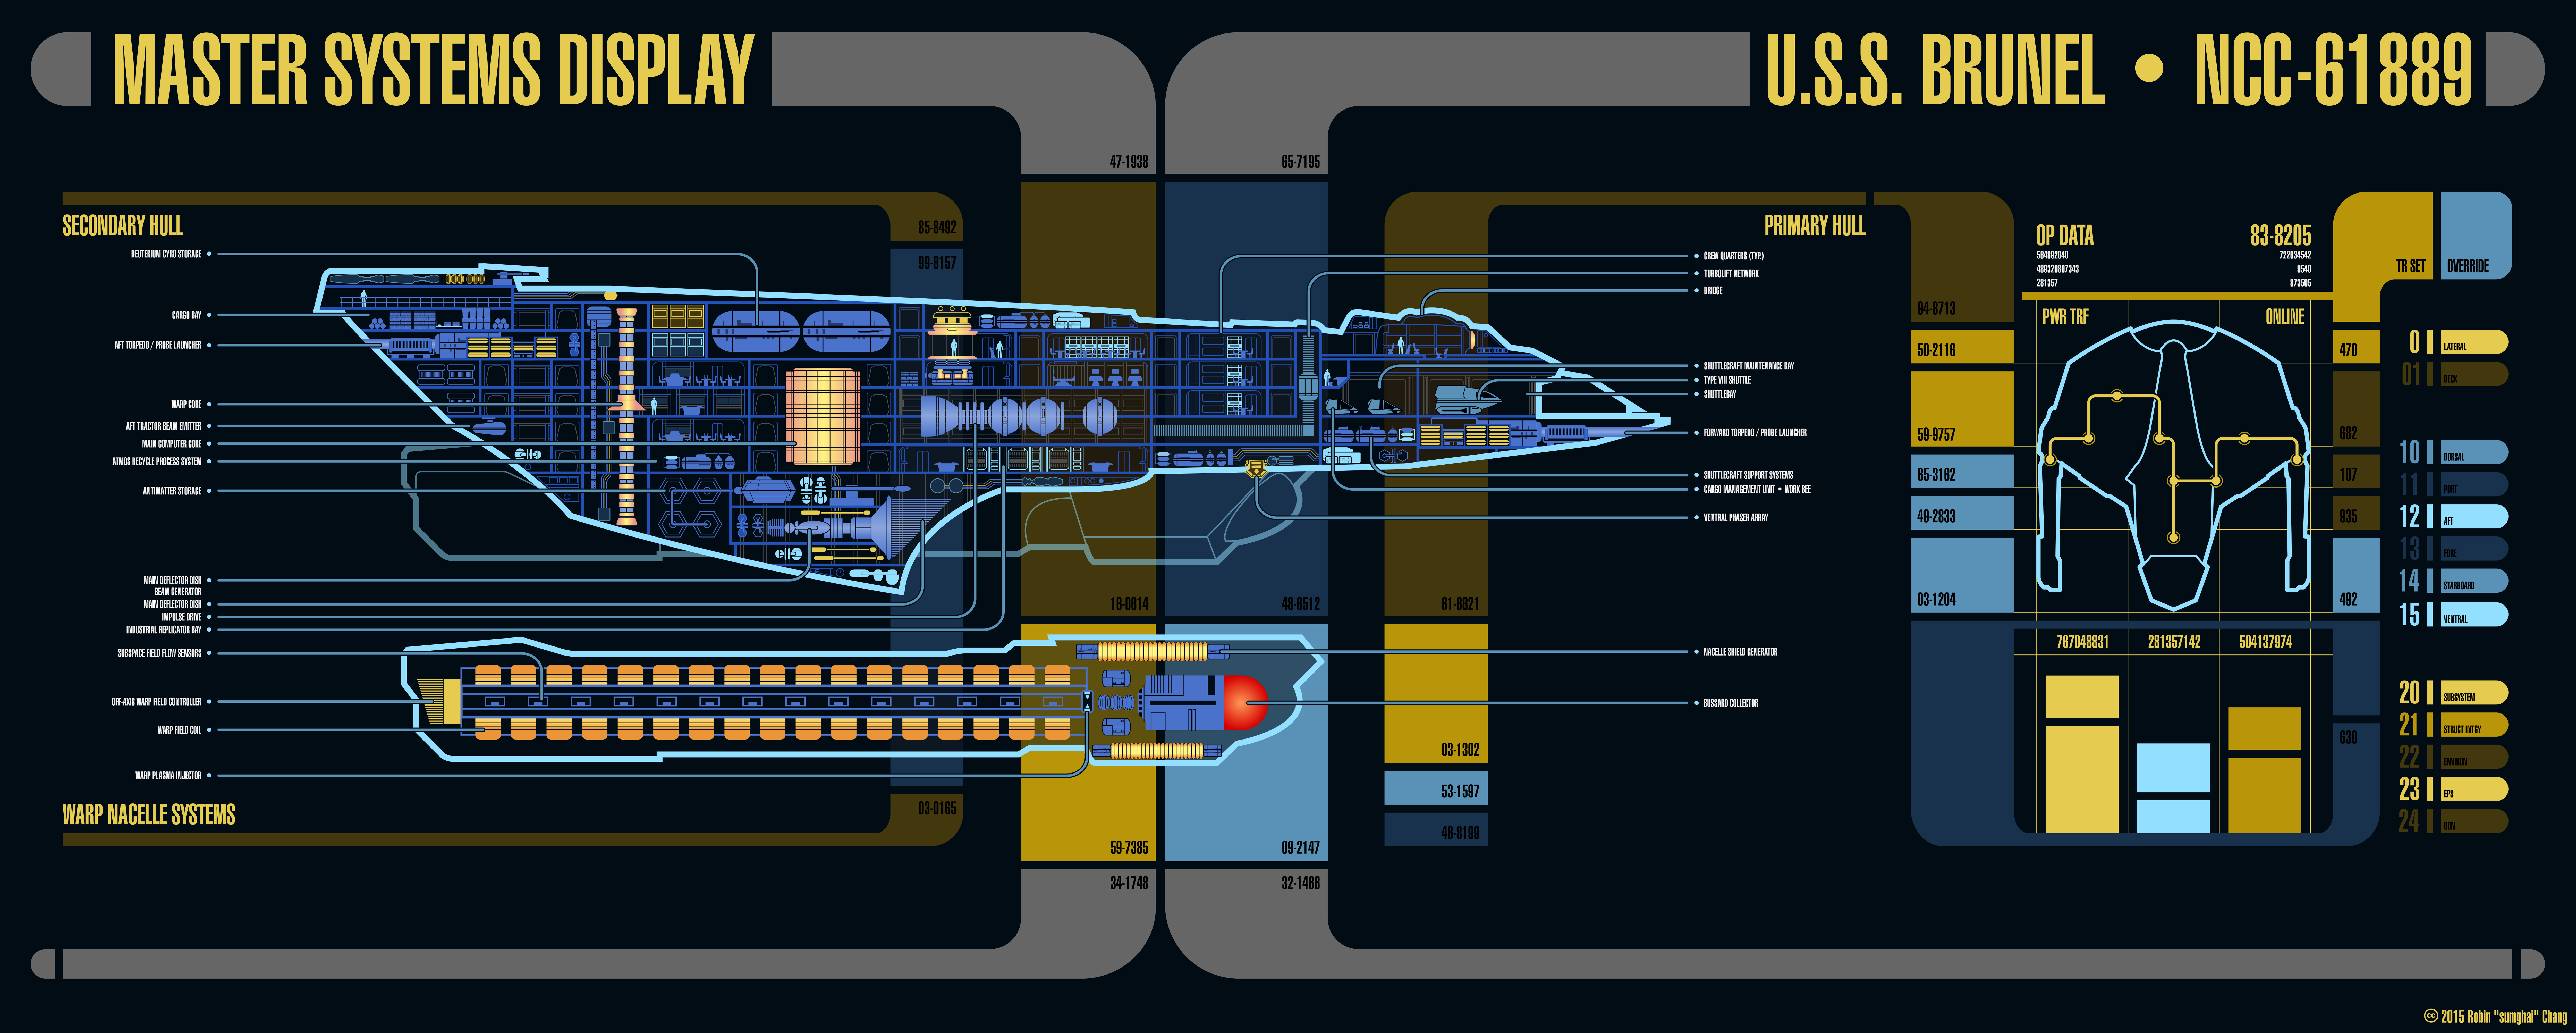 uss_brunel__ncc_61889____master_systems_display_by_sumghai-d9ir6zz.png